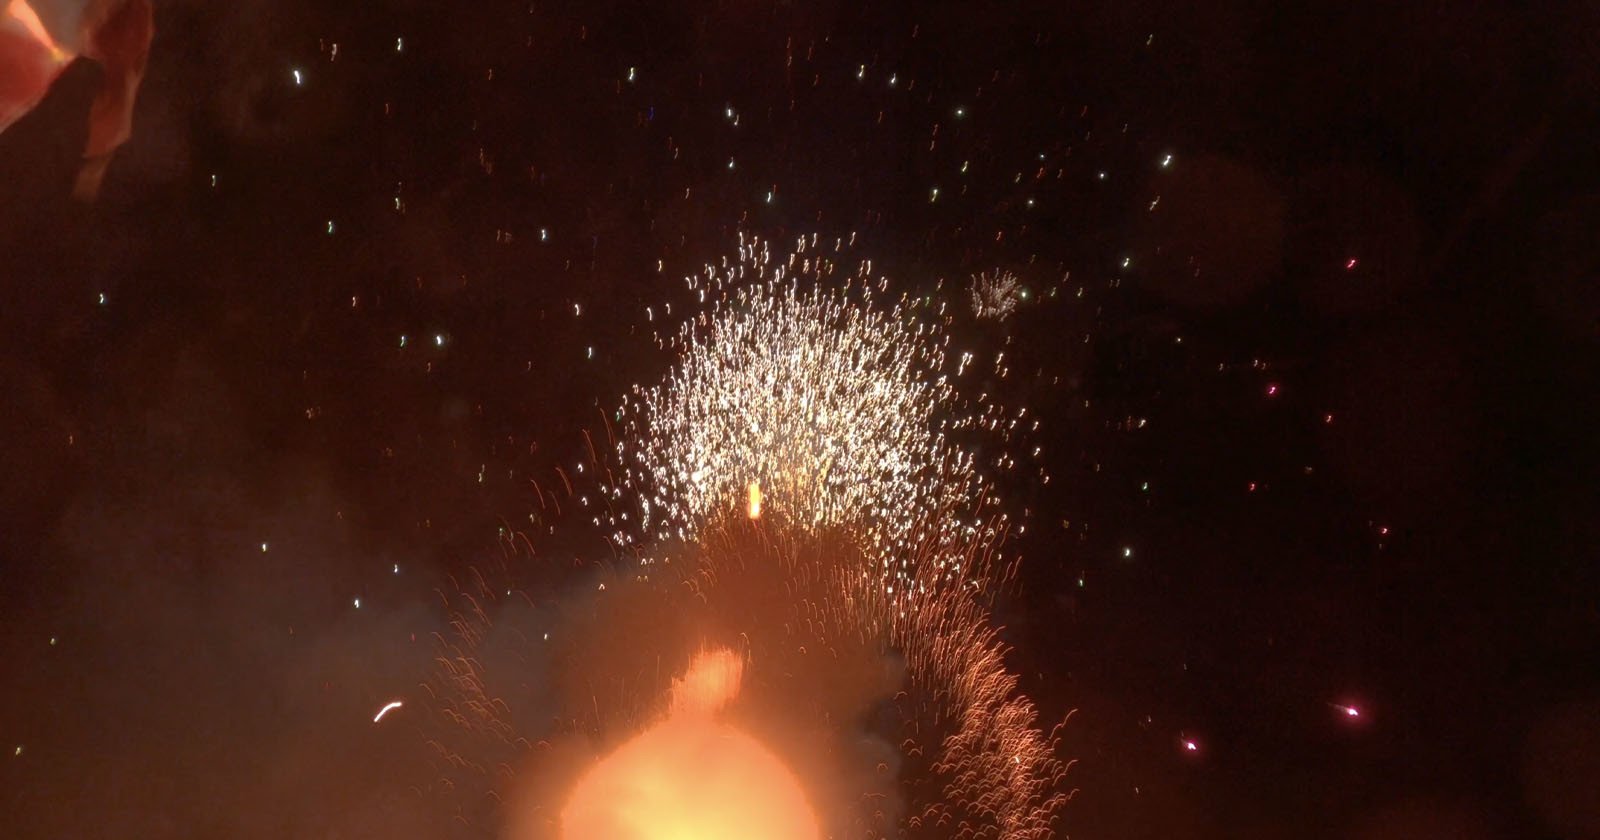  rare footage shows firework show seen from 